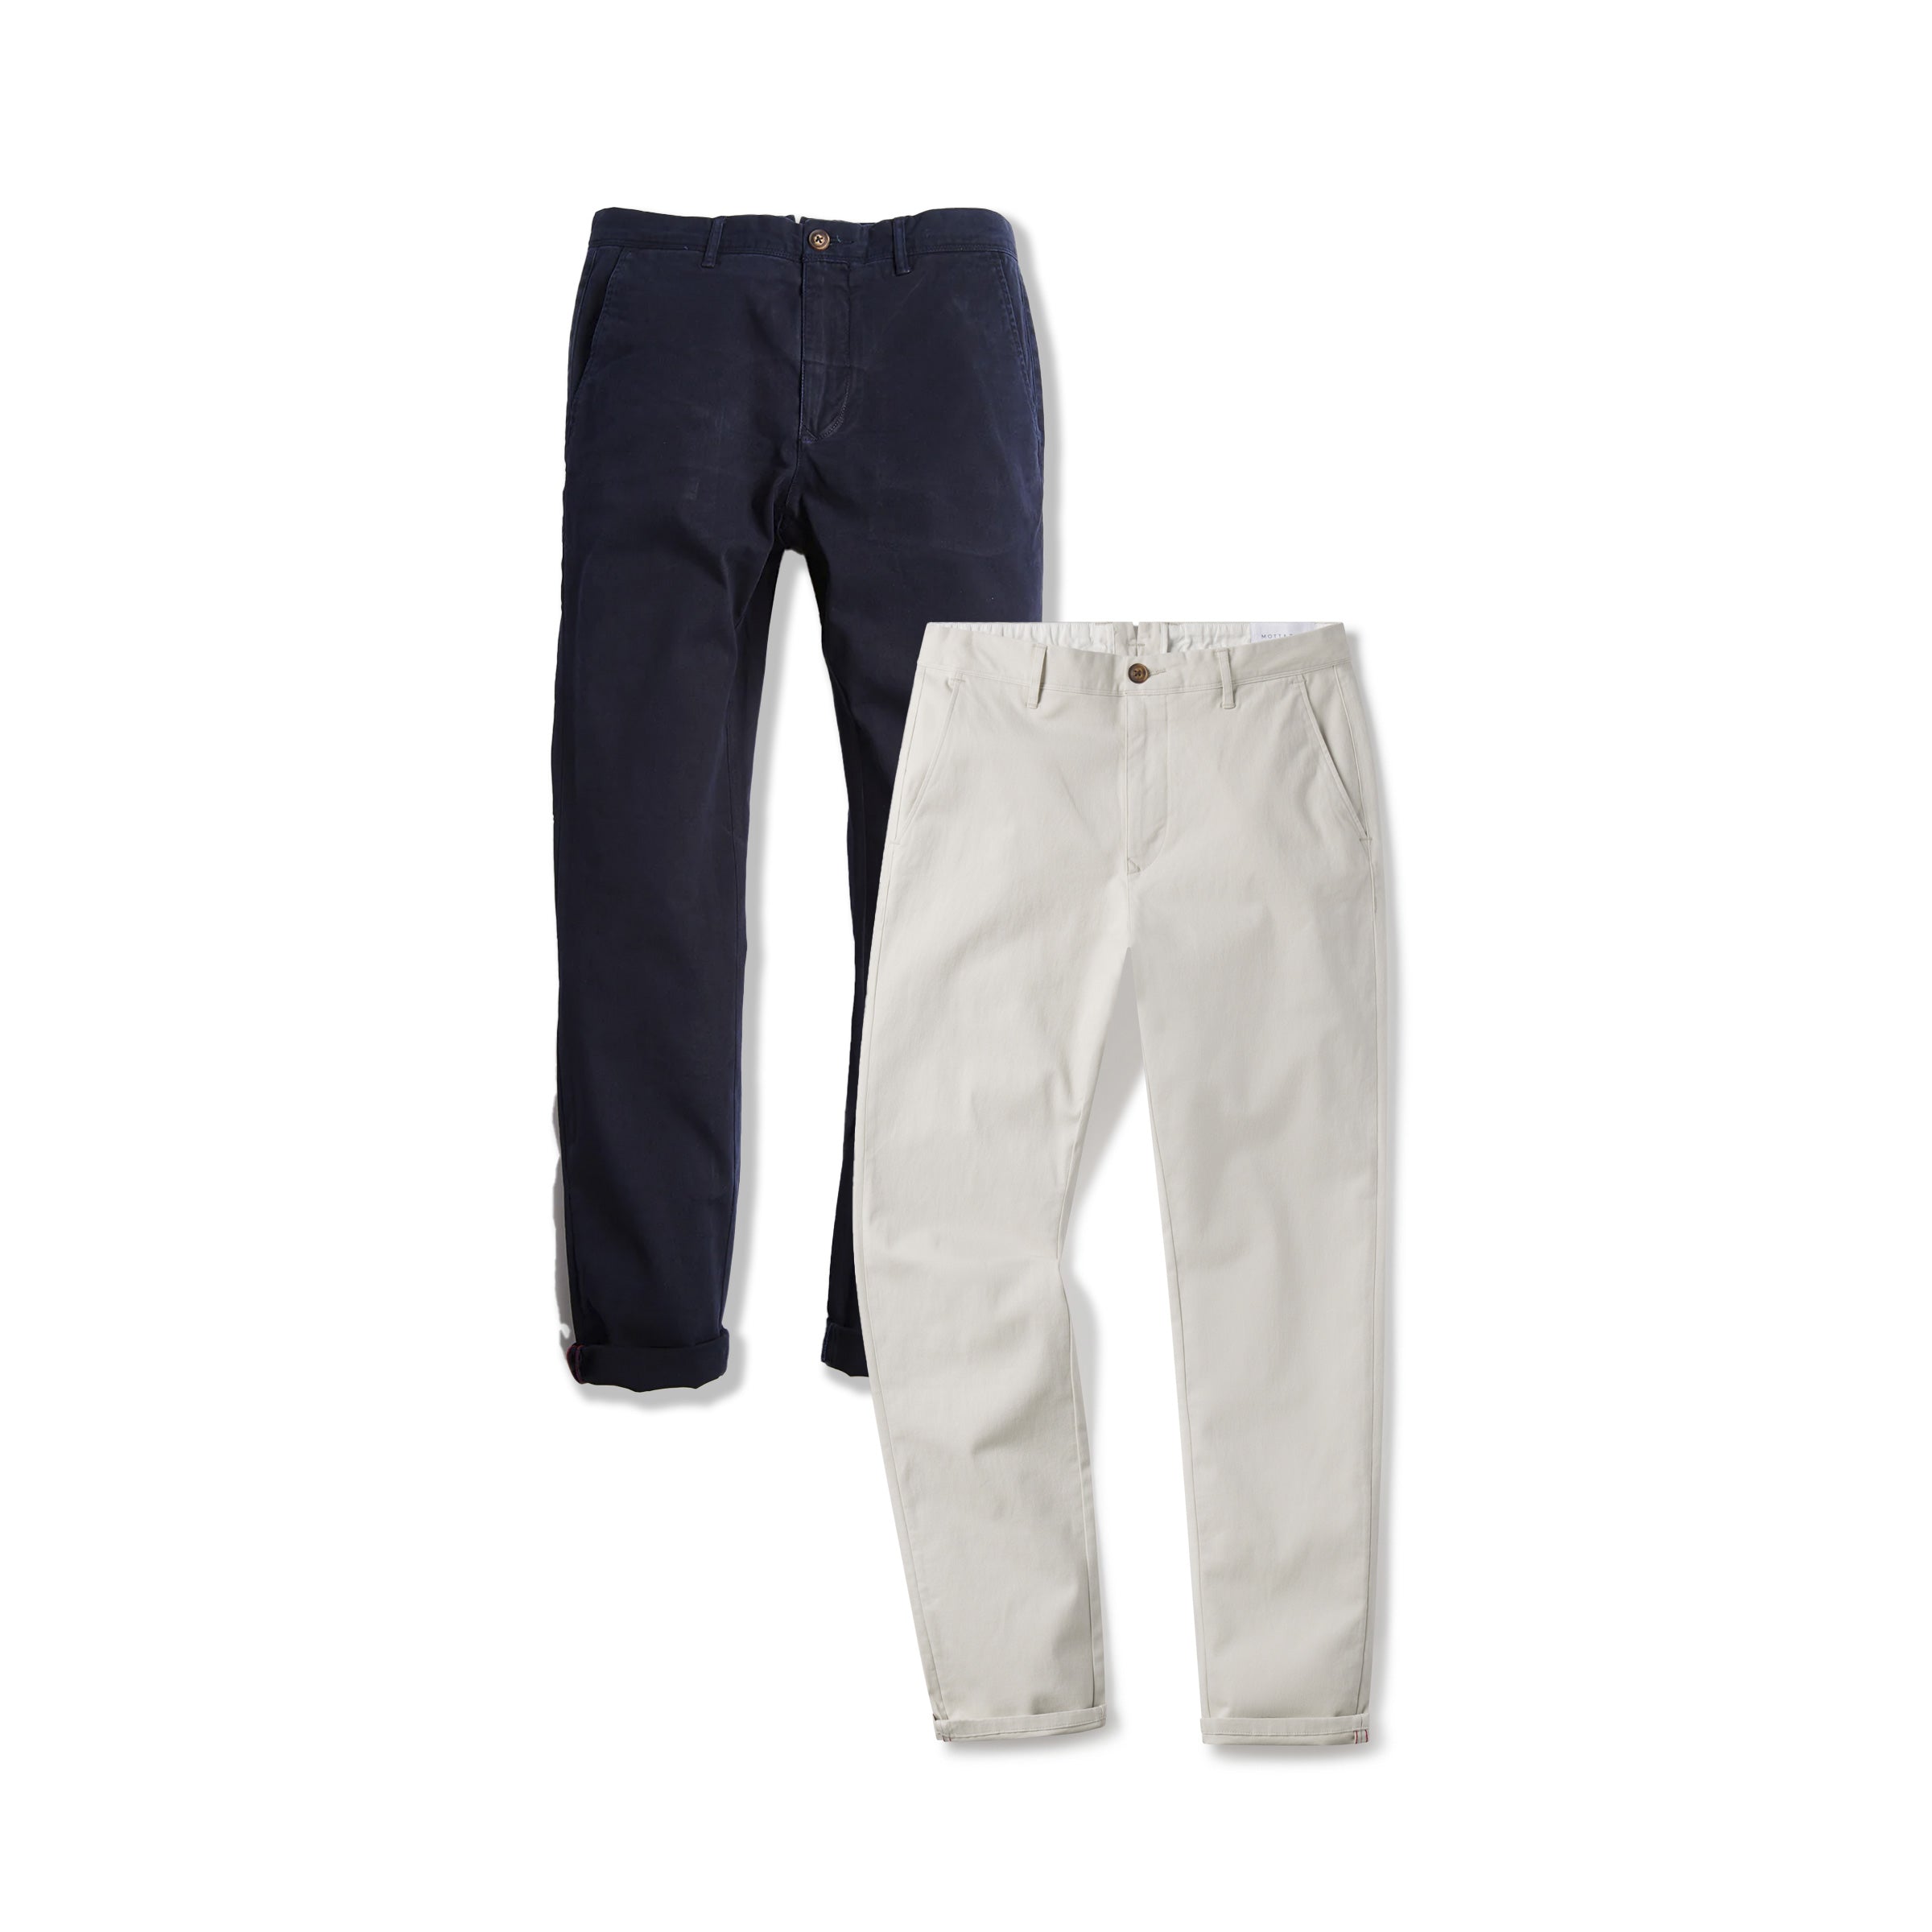  wearing Navy/Beige The Twill Chino Charles 2-Pack